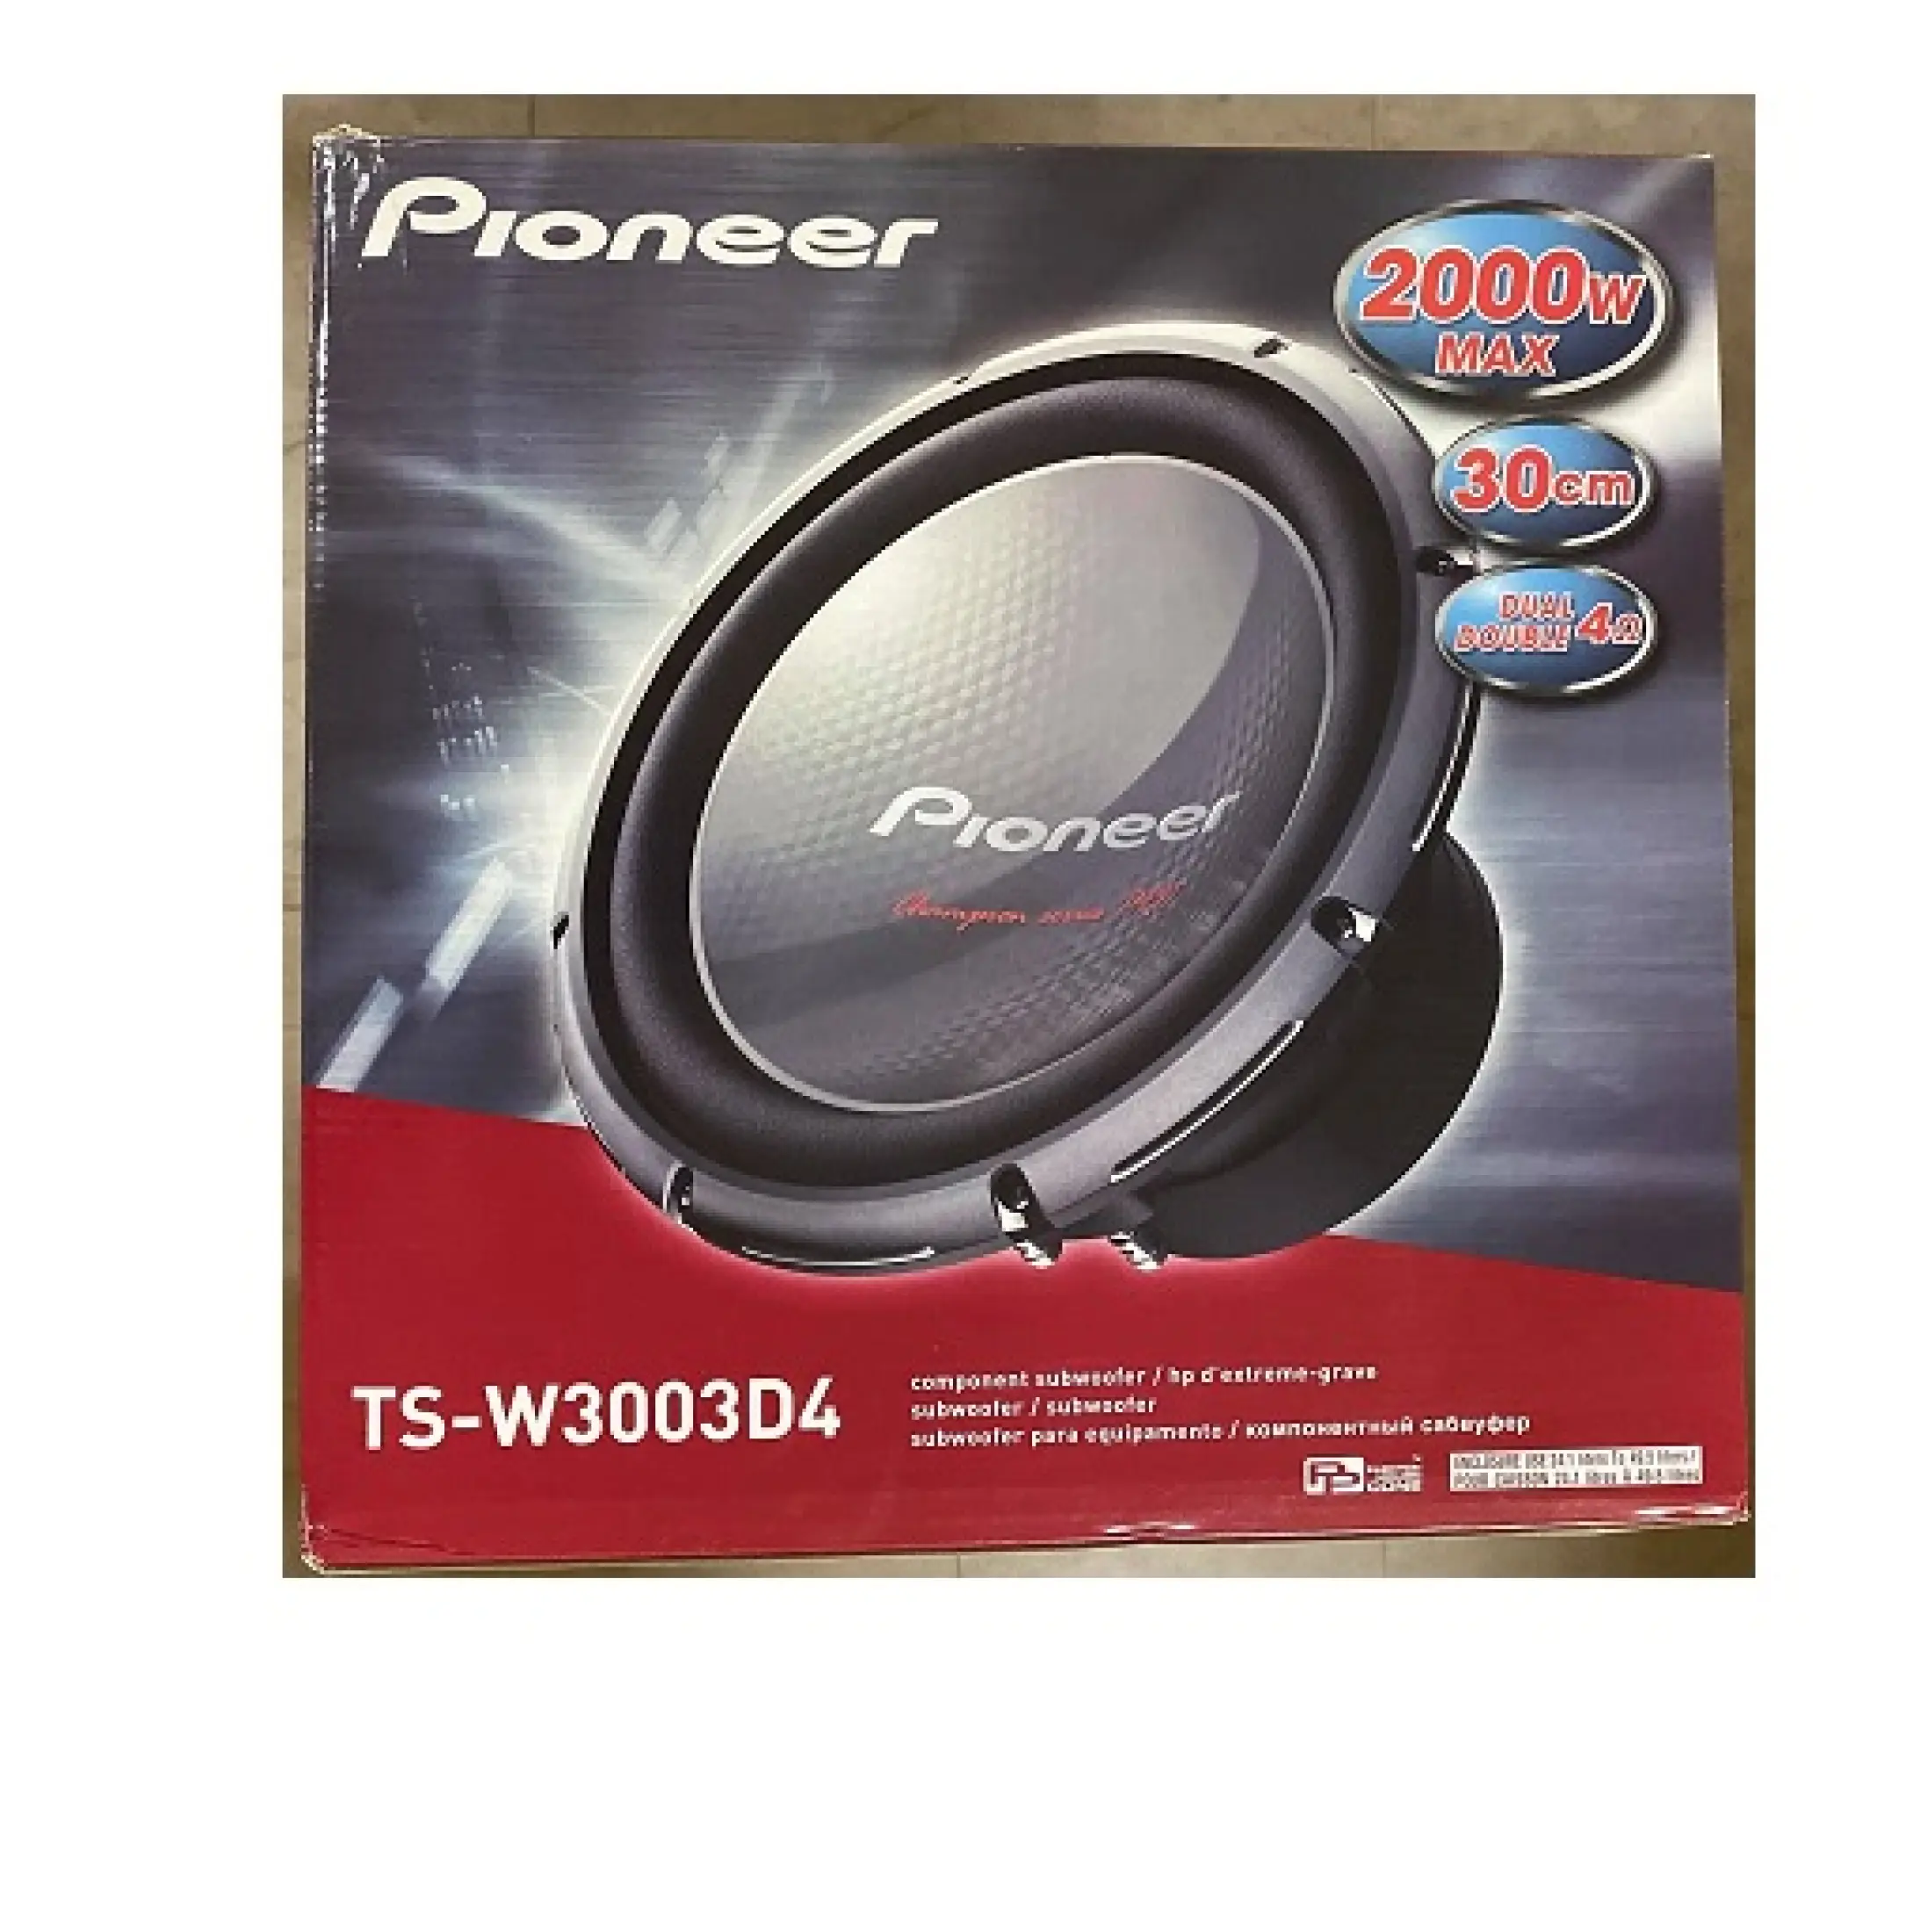 Pioneer TS-W3003D4 12" Champion Series PRO Subwoofer with Dual 4 Ω Voice Coils 2,000 Watts Max Power (600 Watts Nominal) | Lazada